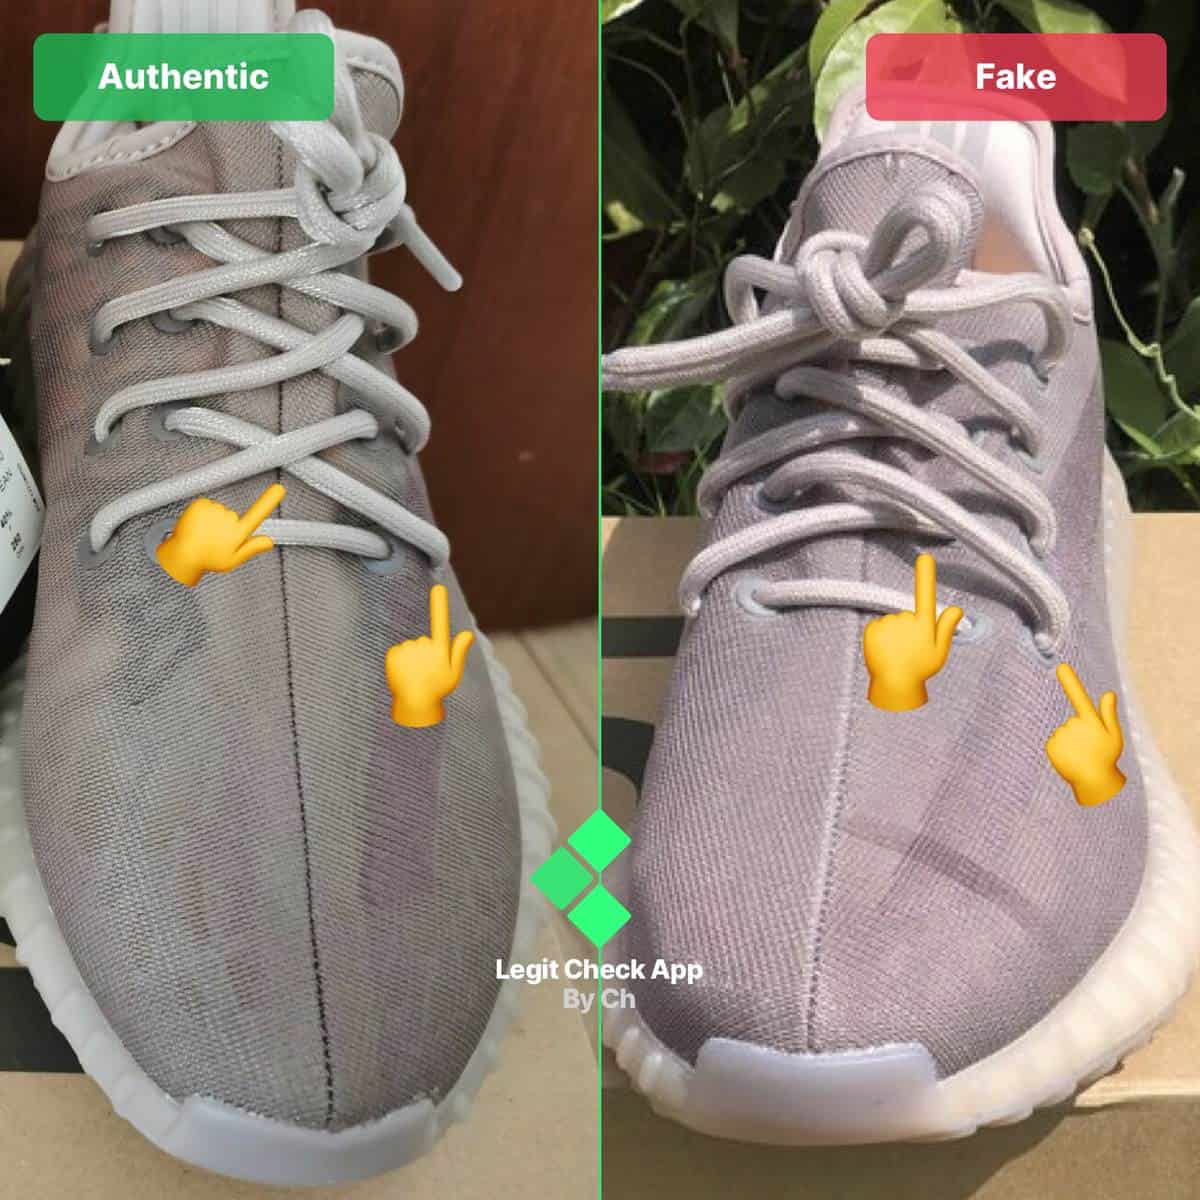 Yeezy Boost 350 V2 Mono Mist Fake Vs Real Guide - Legit Check By Ch